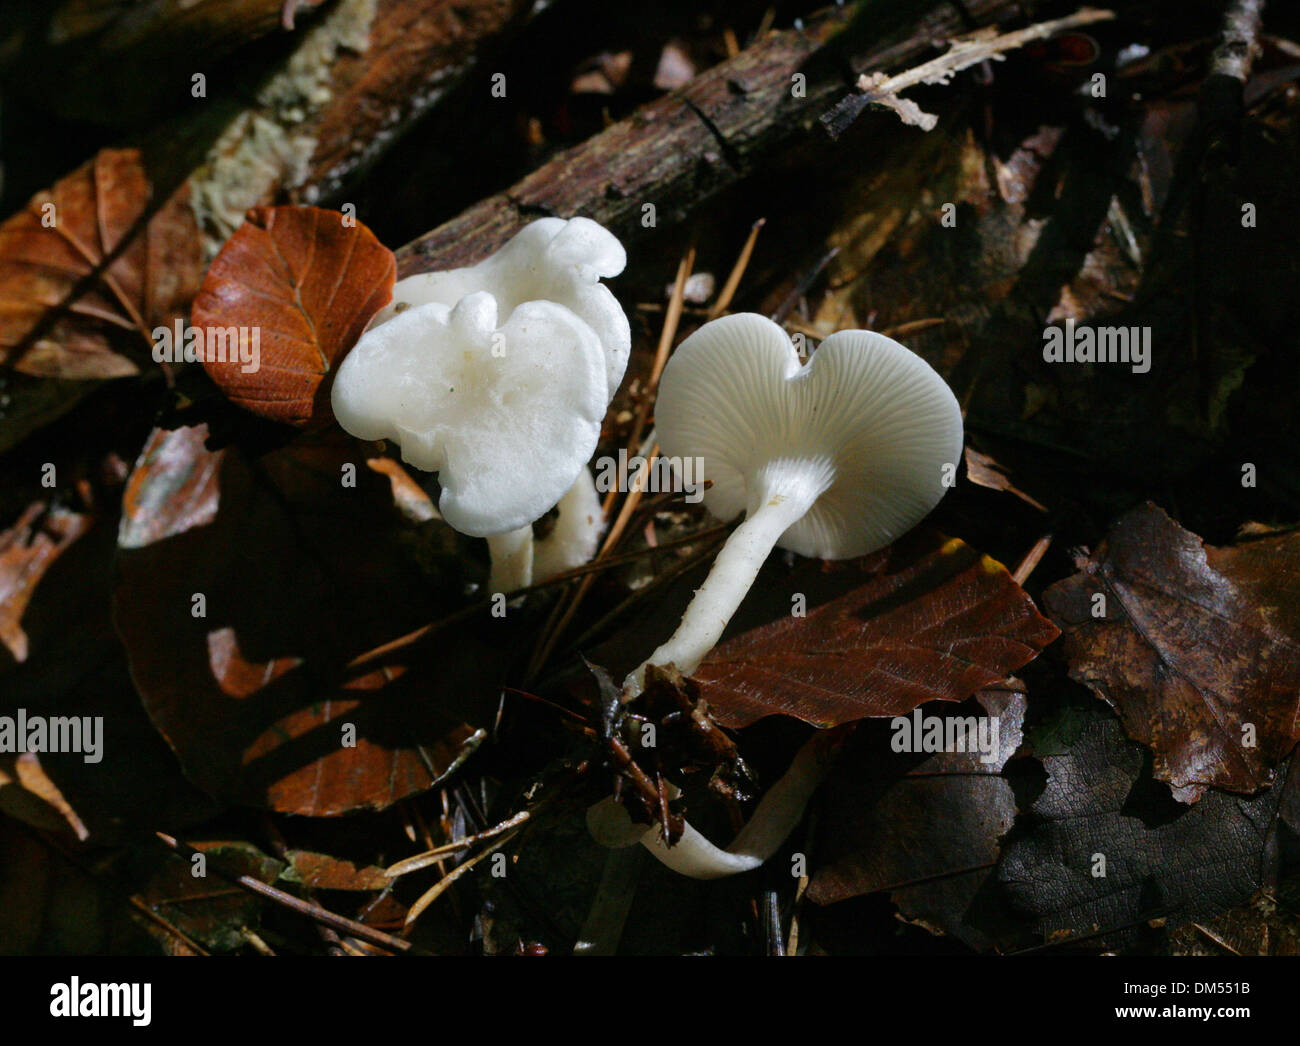 Frosty Funnel Fungus, Clitocybe phyllophila, Tricholomataceae. Syn. C cerussata. Stock Photo